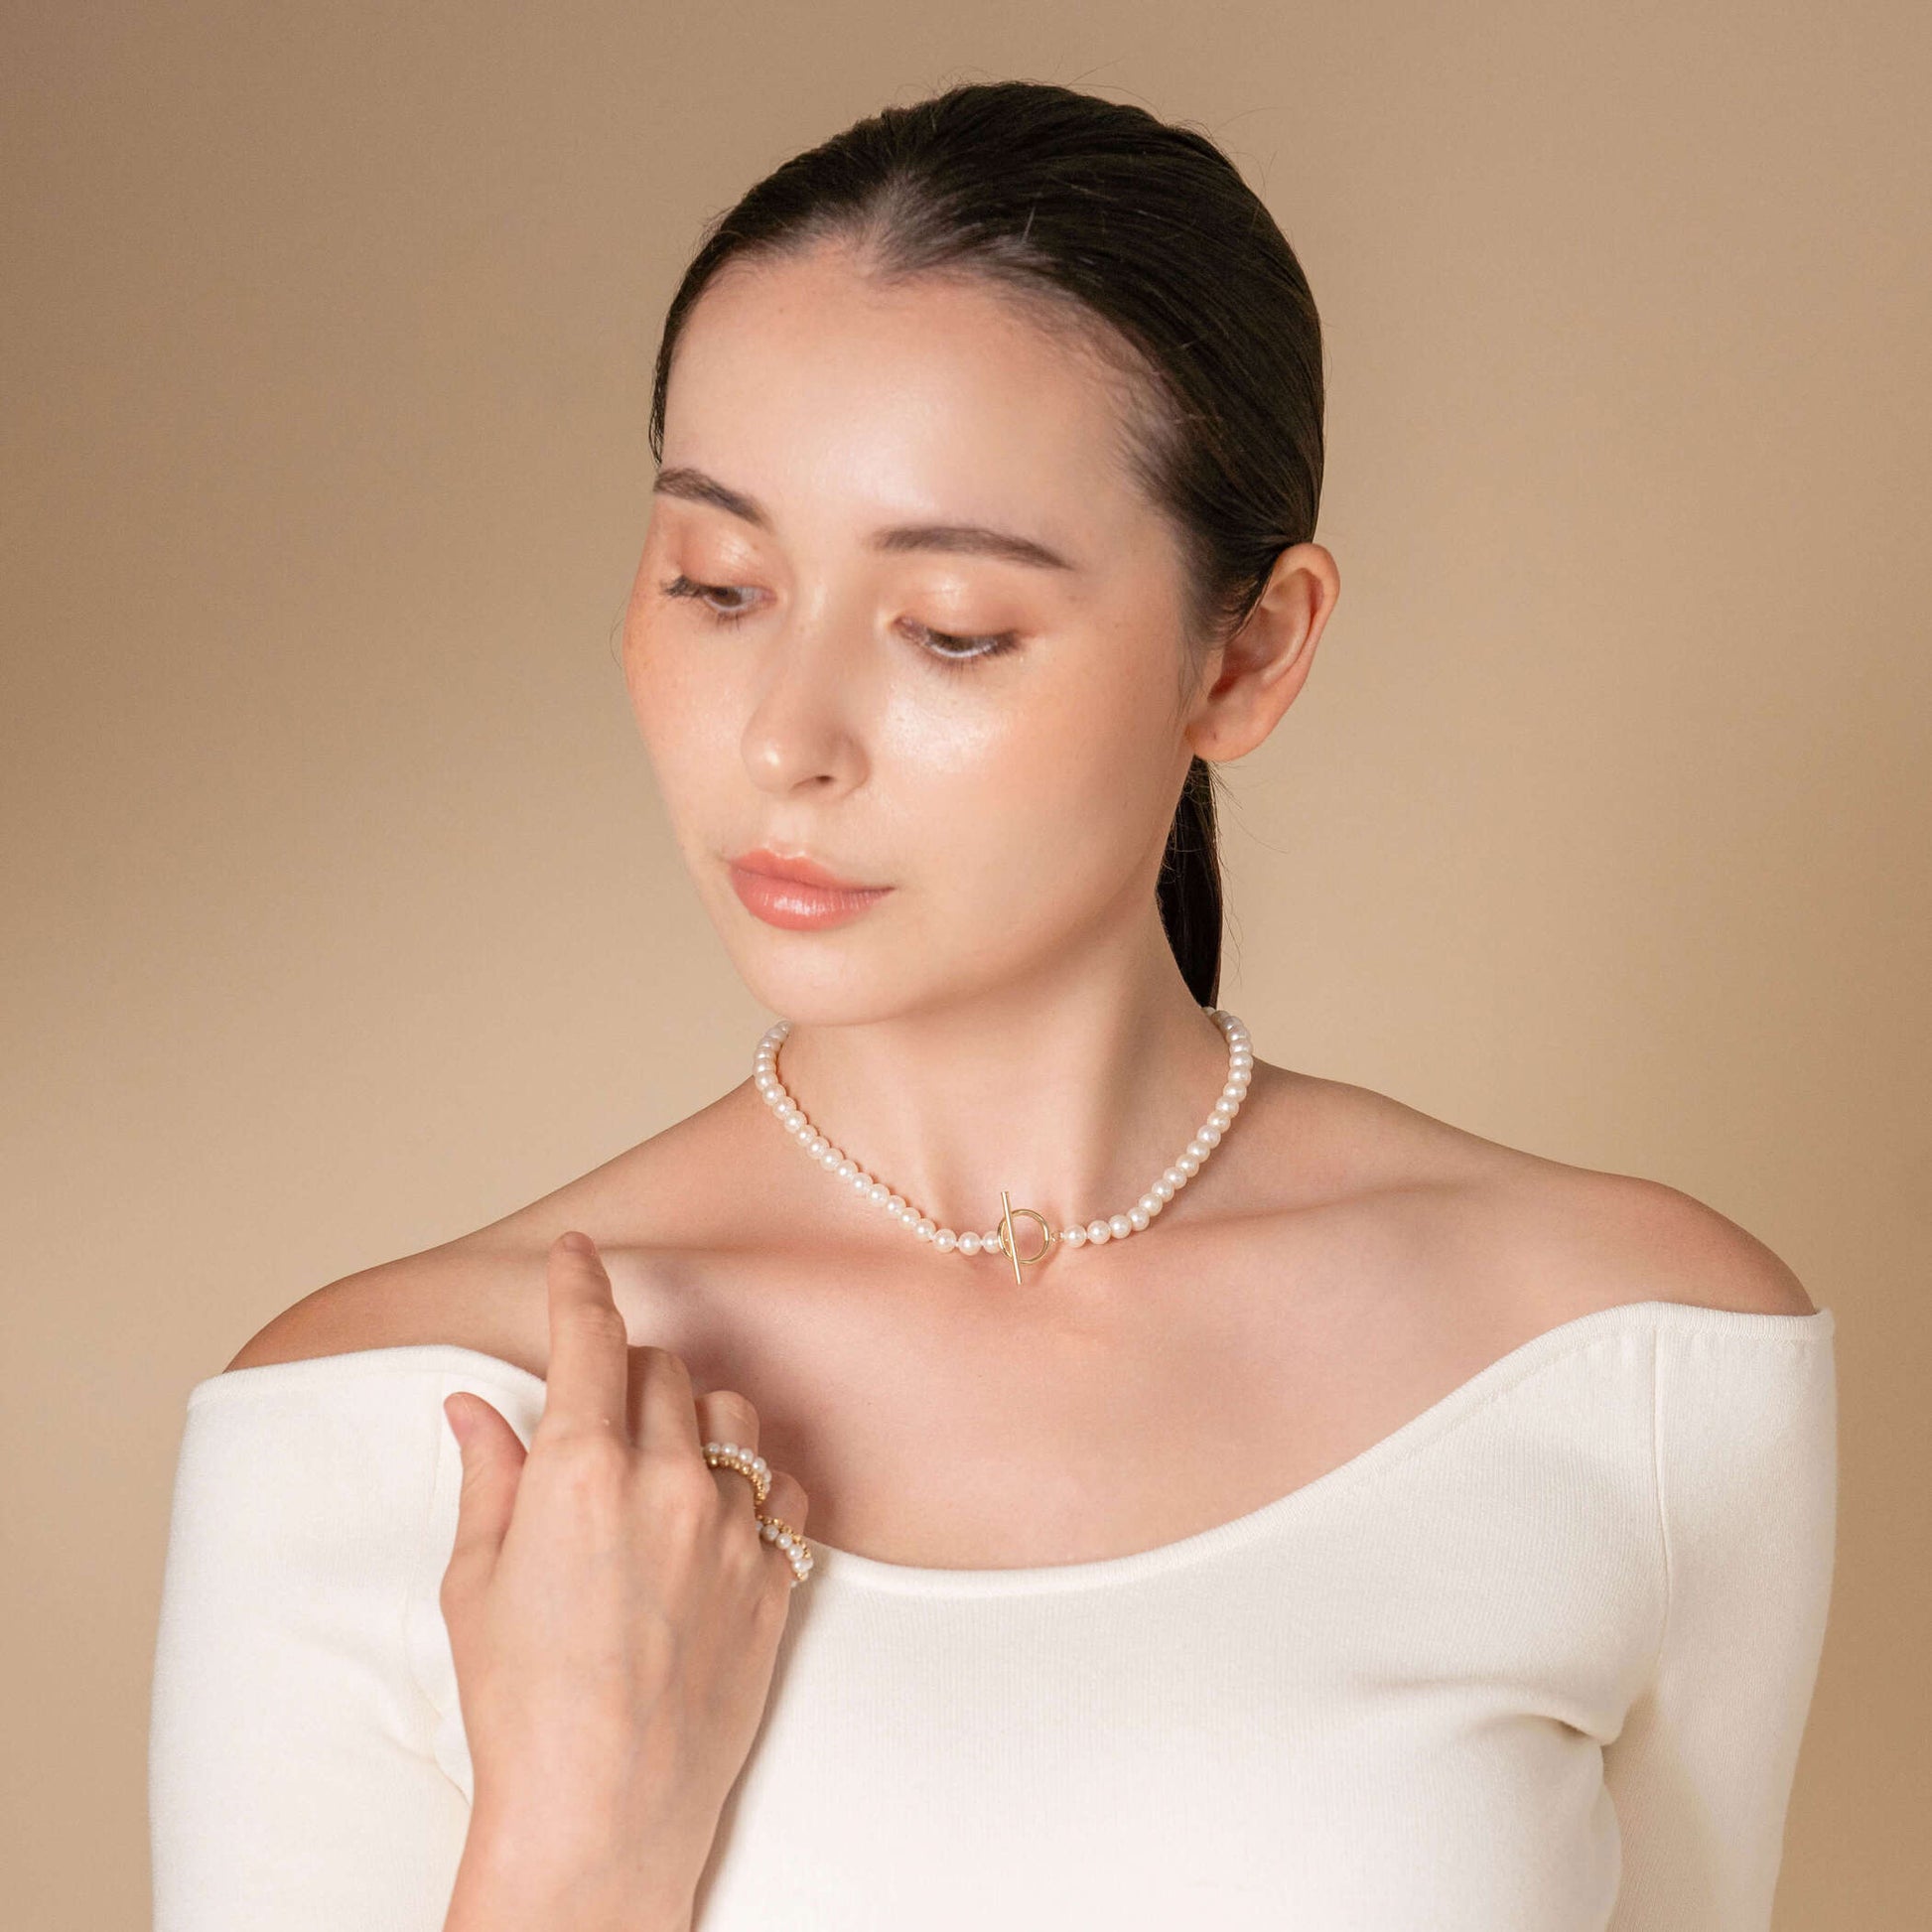 Enhance your style with a classic touch - woman in white top and pearl necklace. Mantel Pearl Necklace Short.